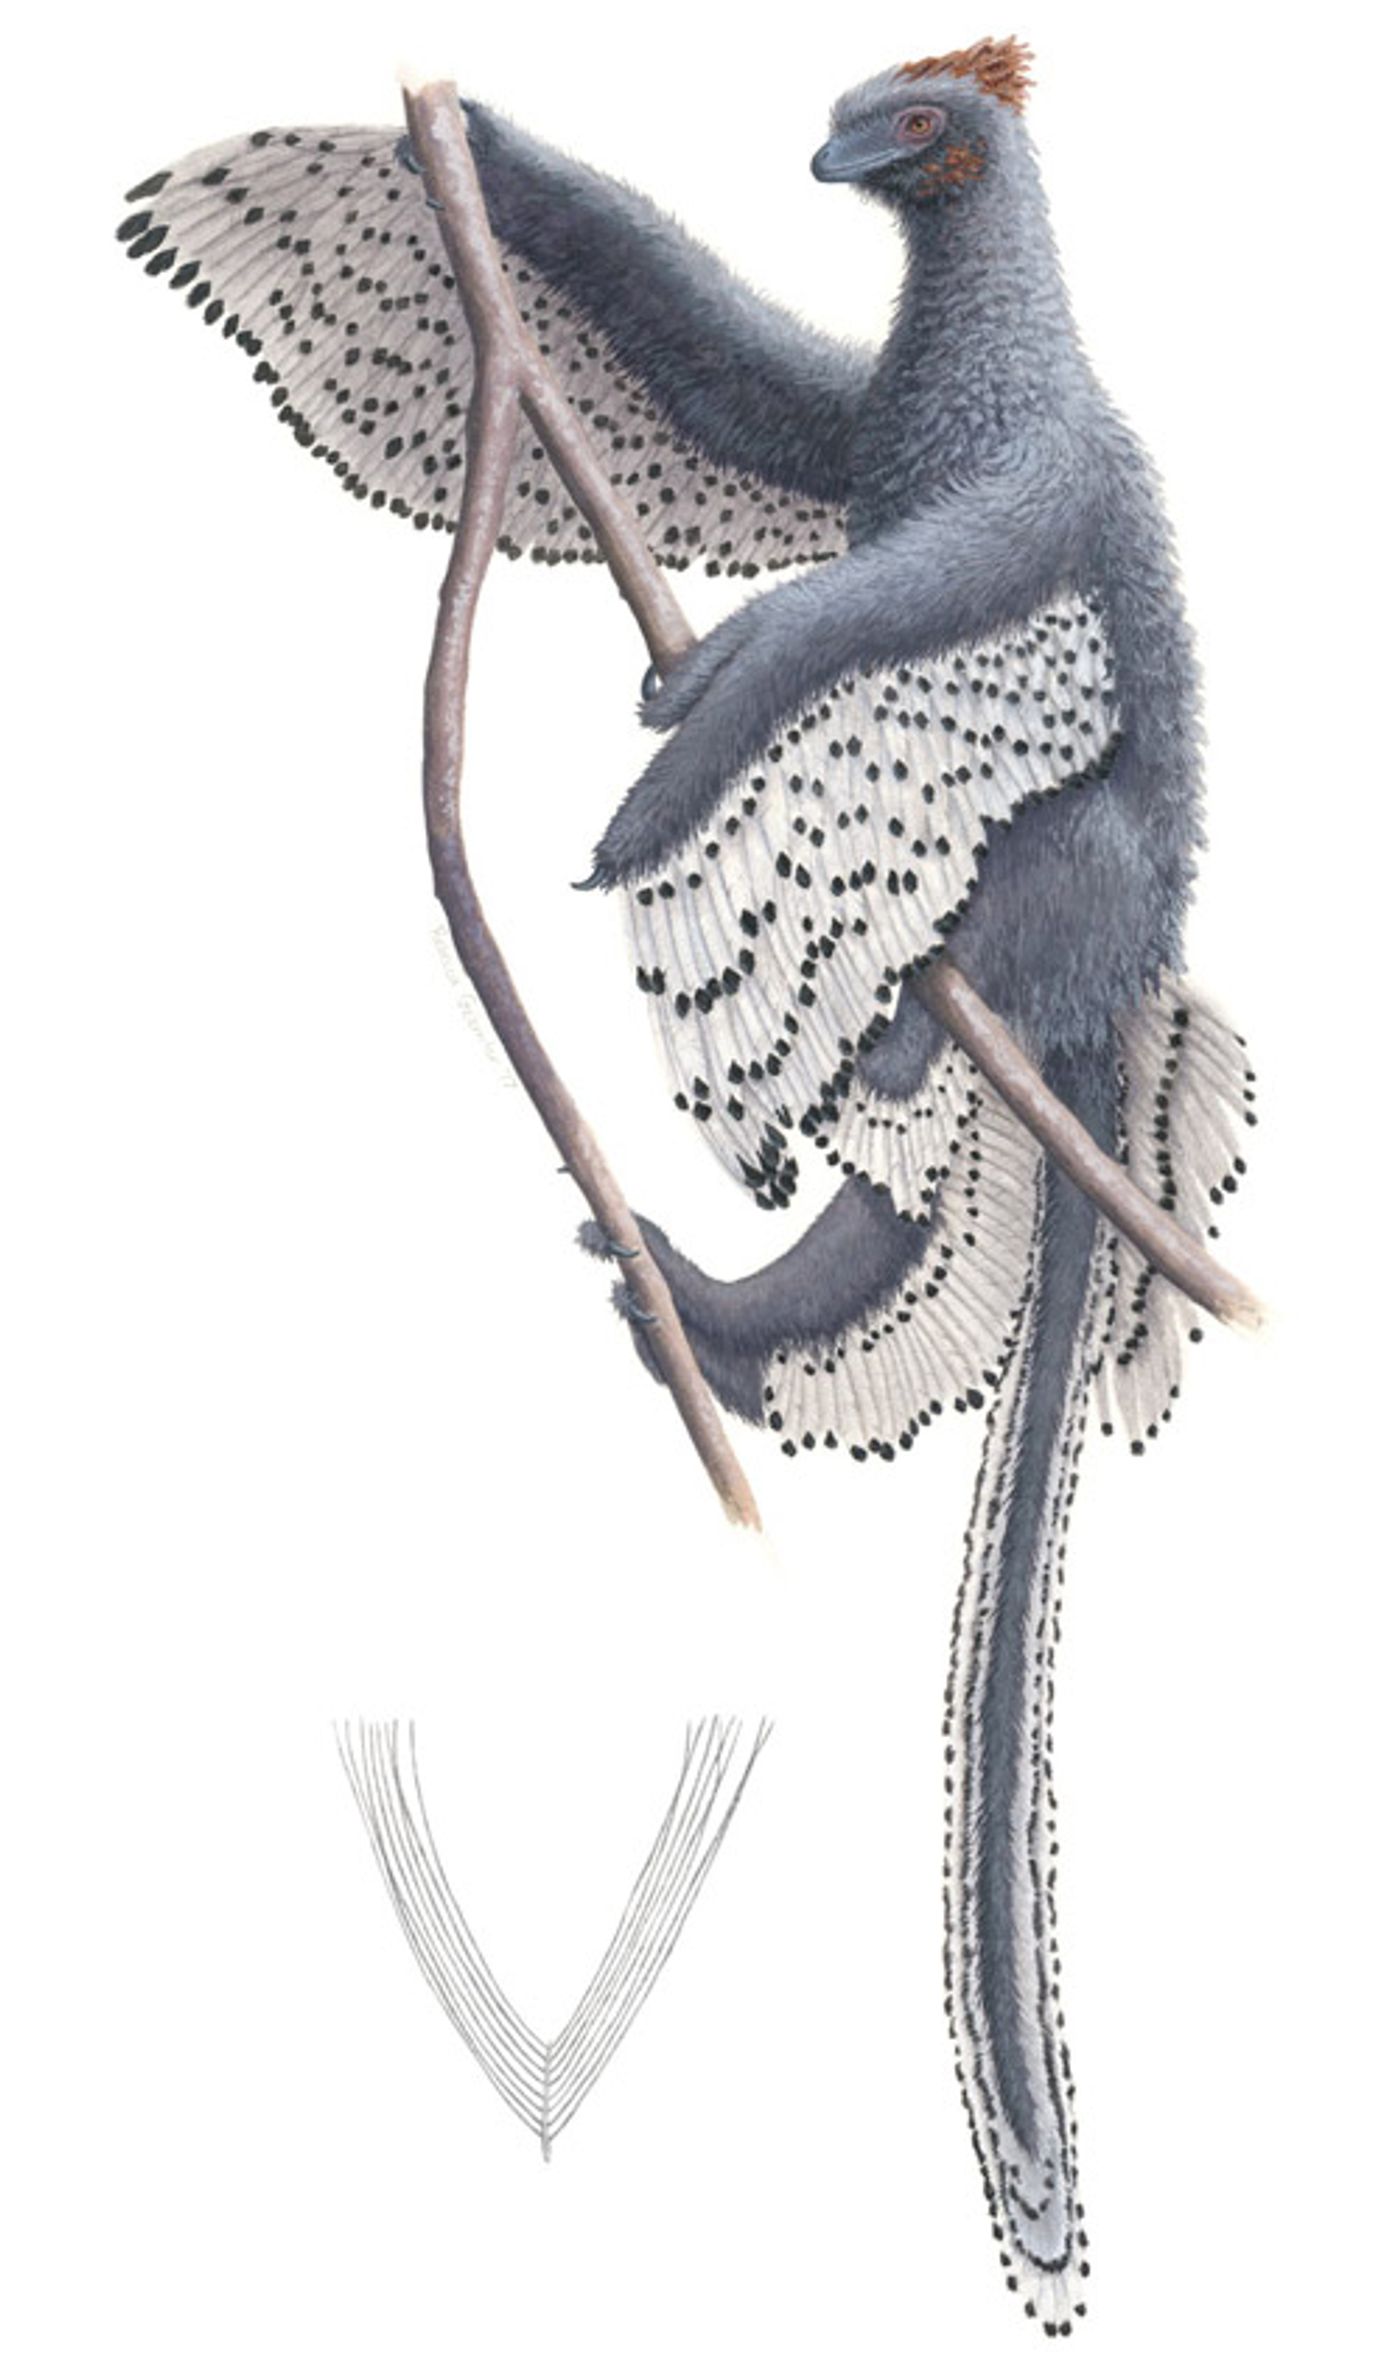 An artist's rendition of Anchiornis.